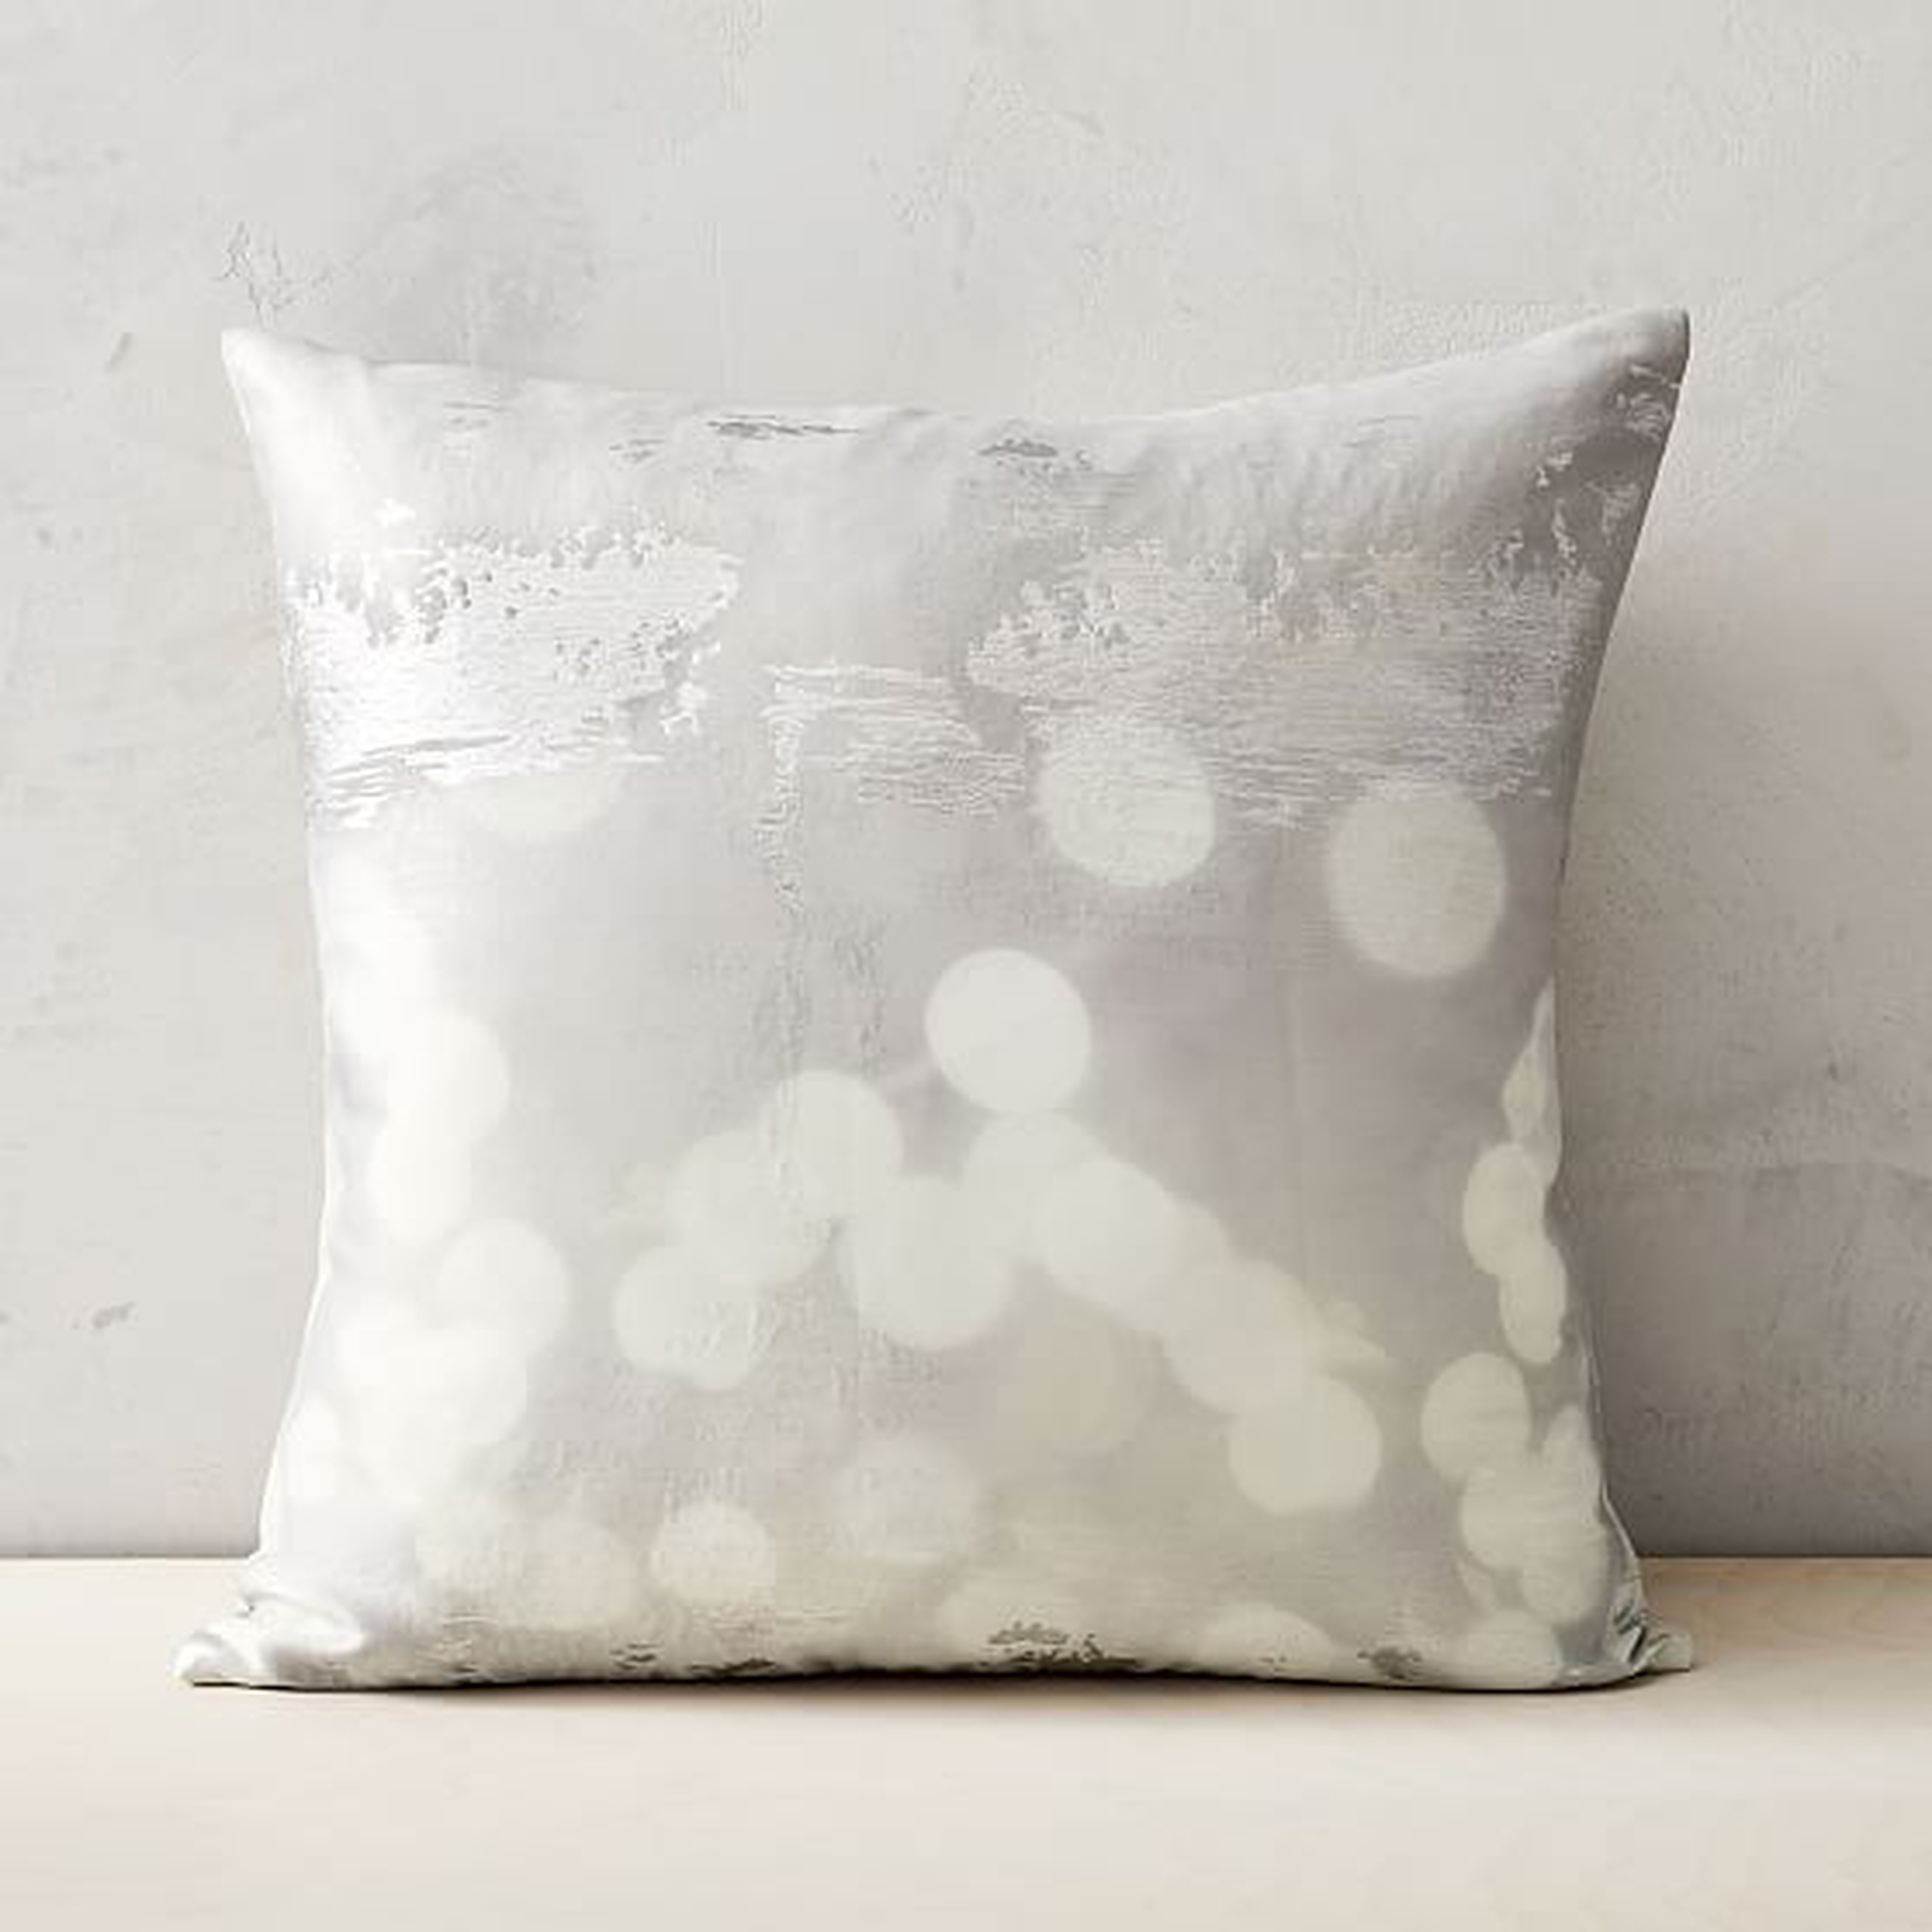 Glimmer Brocade Pillow Cover , Set of 2, Silver, 24"x24" - West Elm